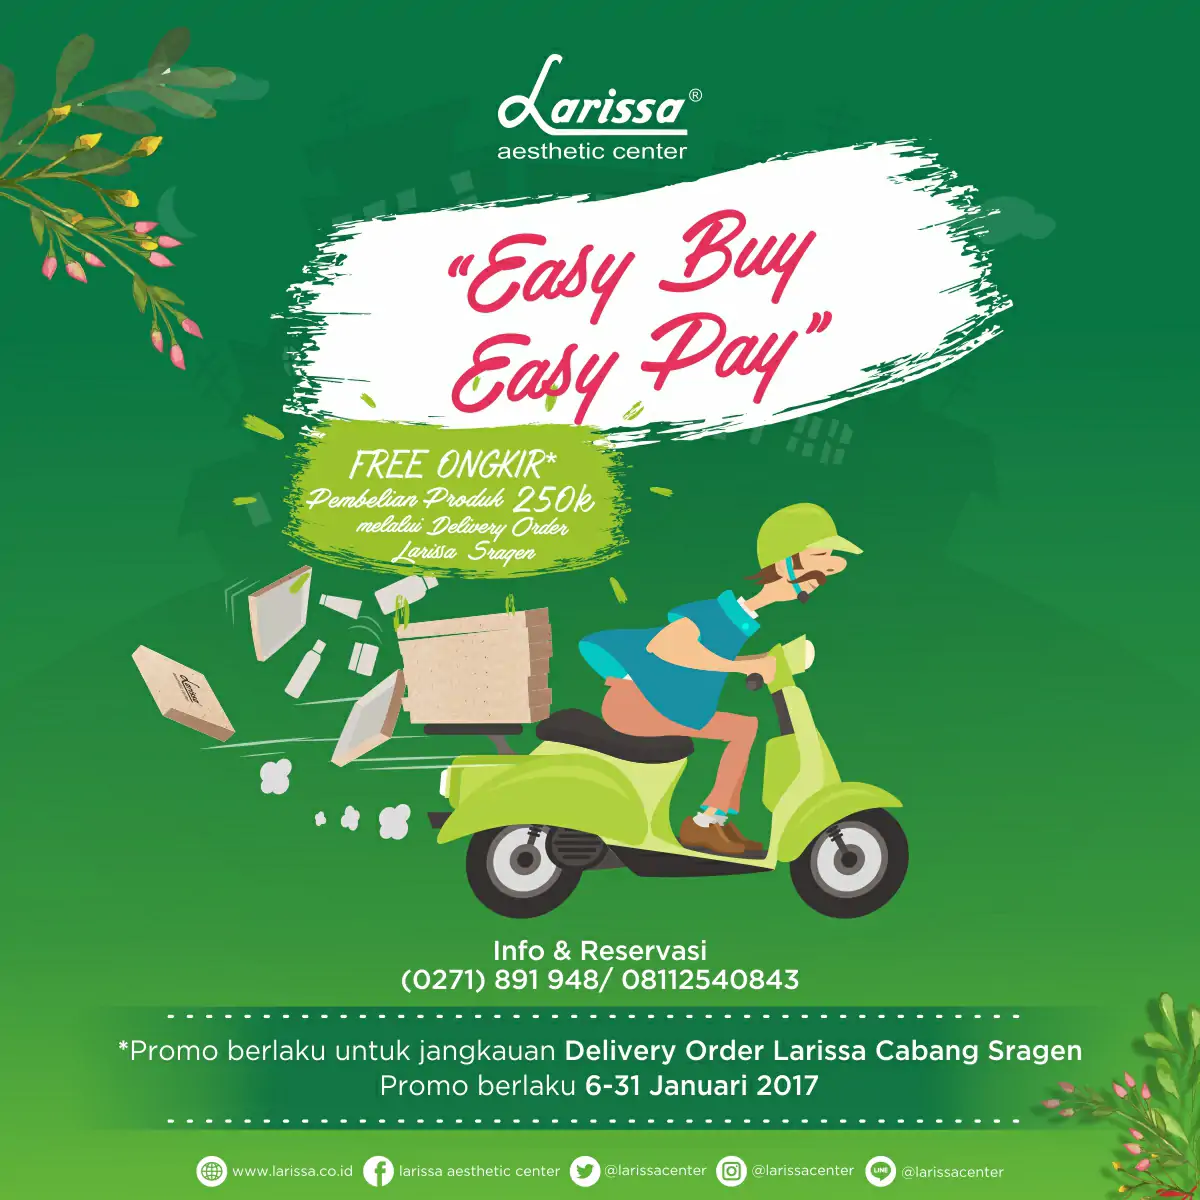 Easy Buy Easy Pay, FREE Ongkir Delivery Order Larissa Sragen